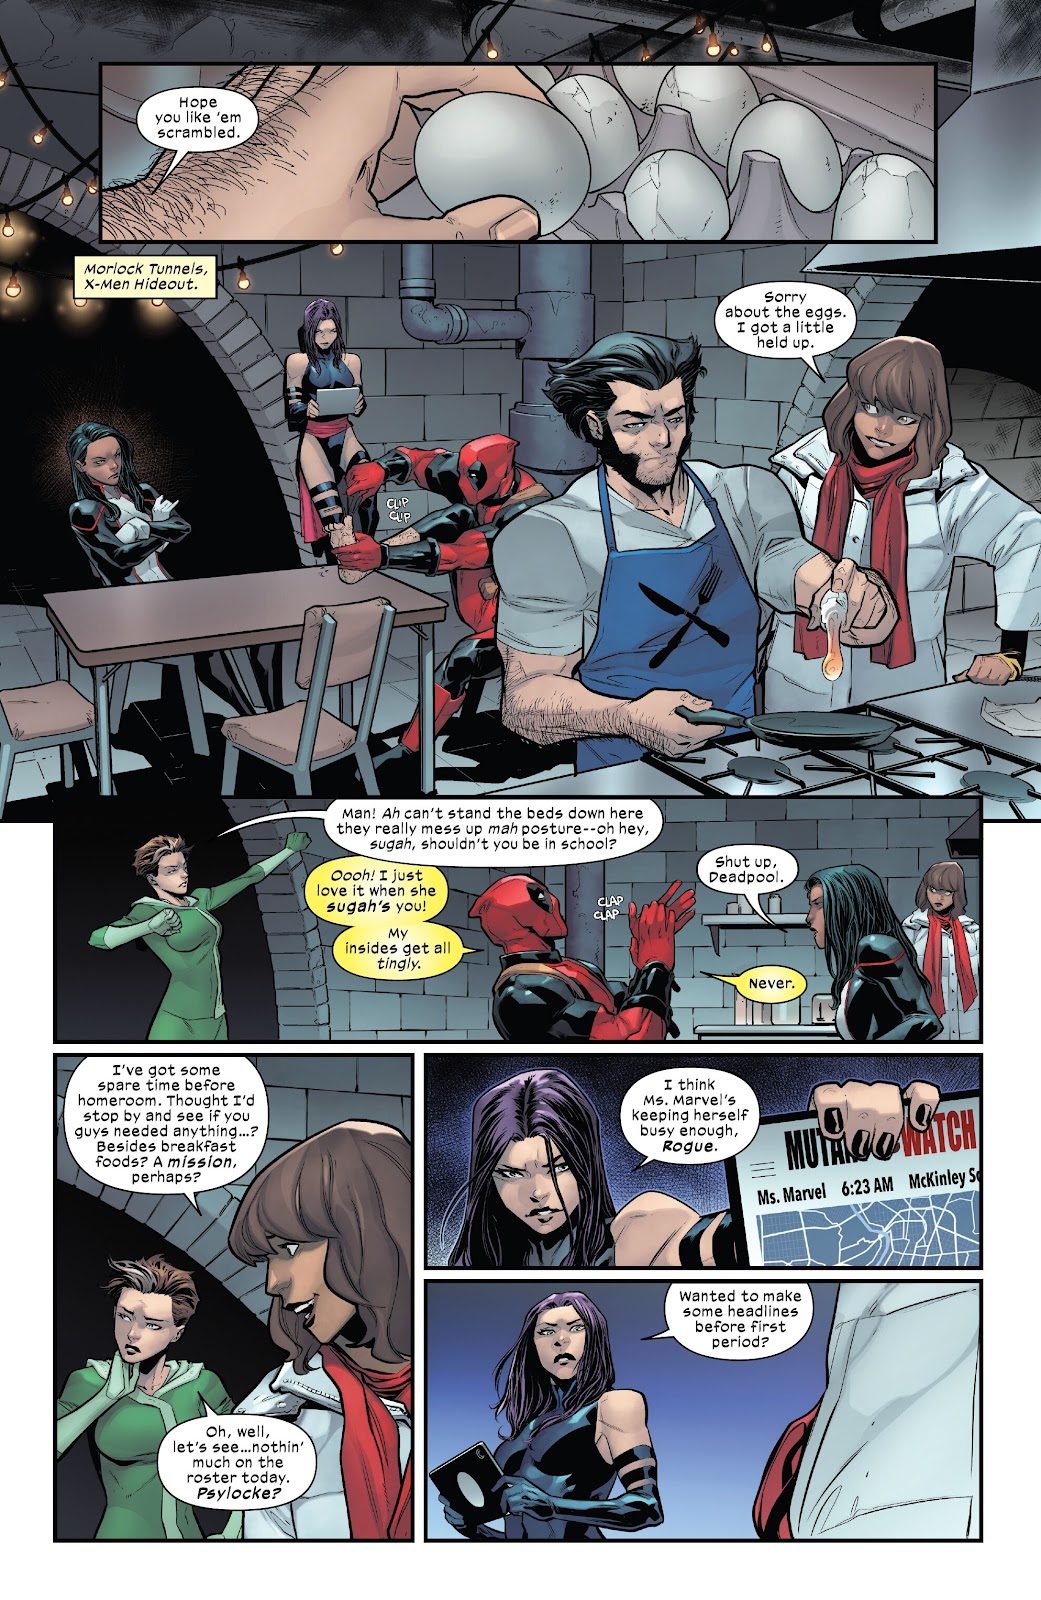 Ms. Marvel: Mutant Menace issue 1 - Page 8